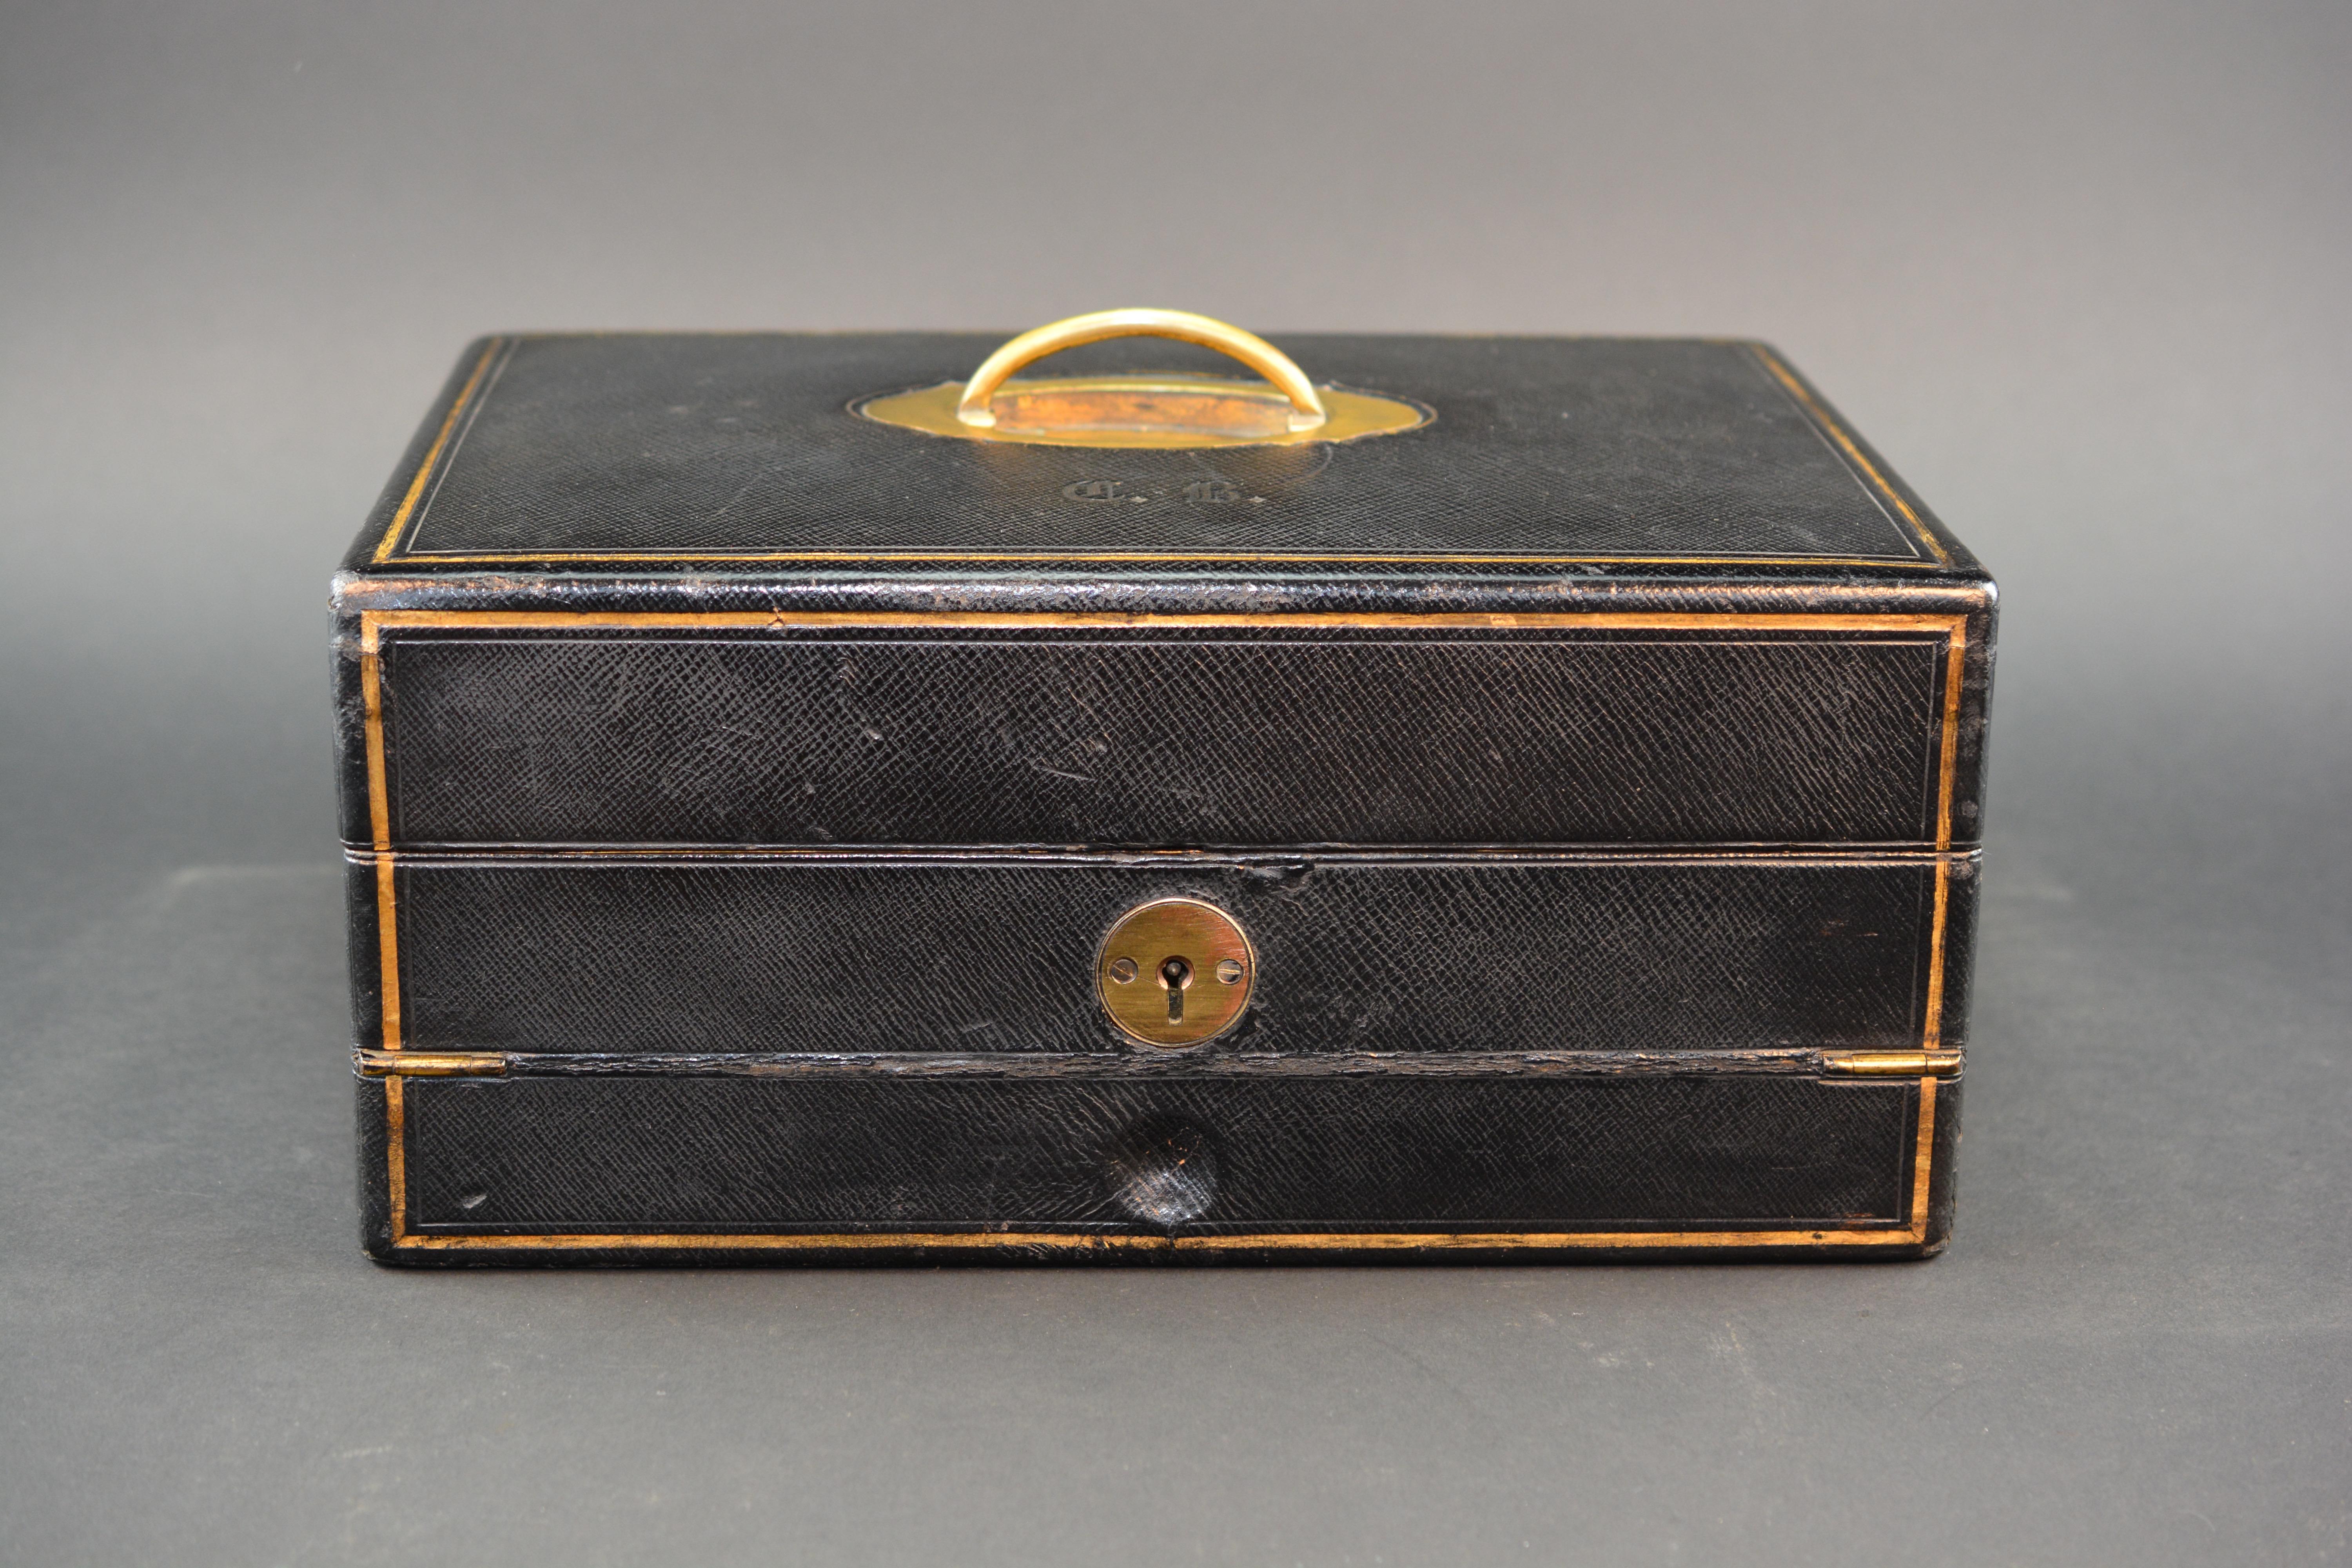 A super quality Victorian writing box by P&F Shafer of 27 Piccadilly London. Hand made from embossed leather with gilt tooling and gilded brass fittings. The box opens to reveal original inkwells, various compartments and sprung correspondence